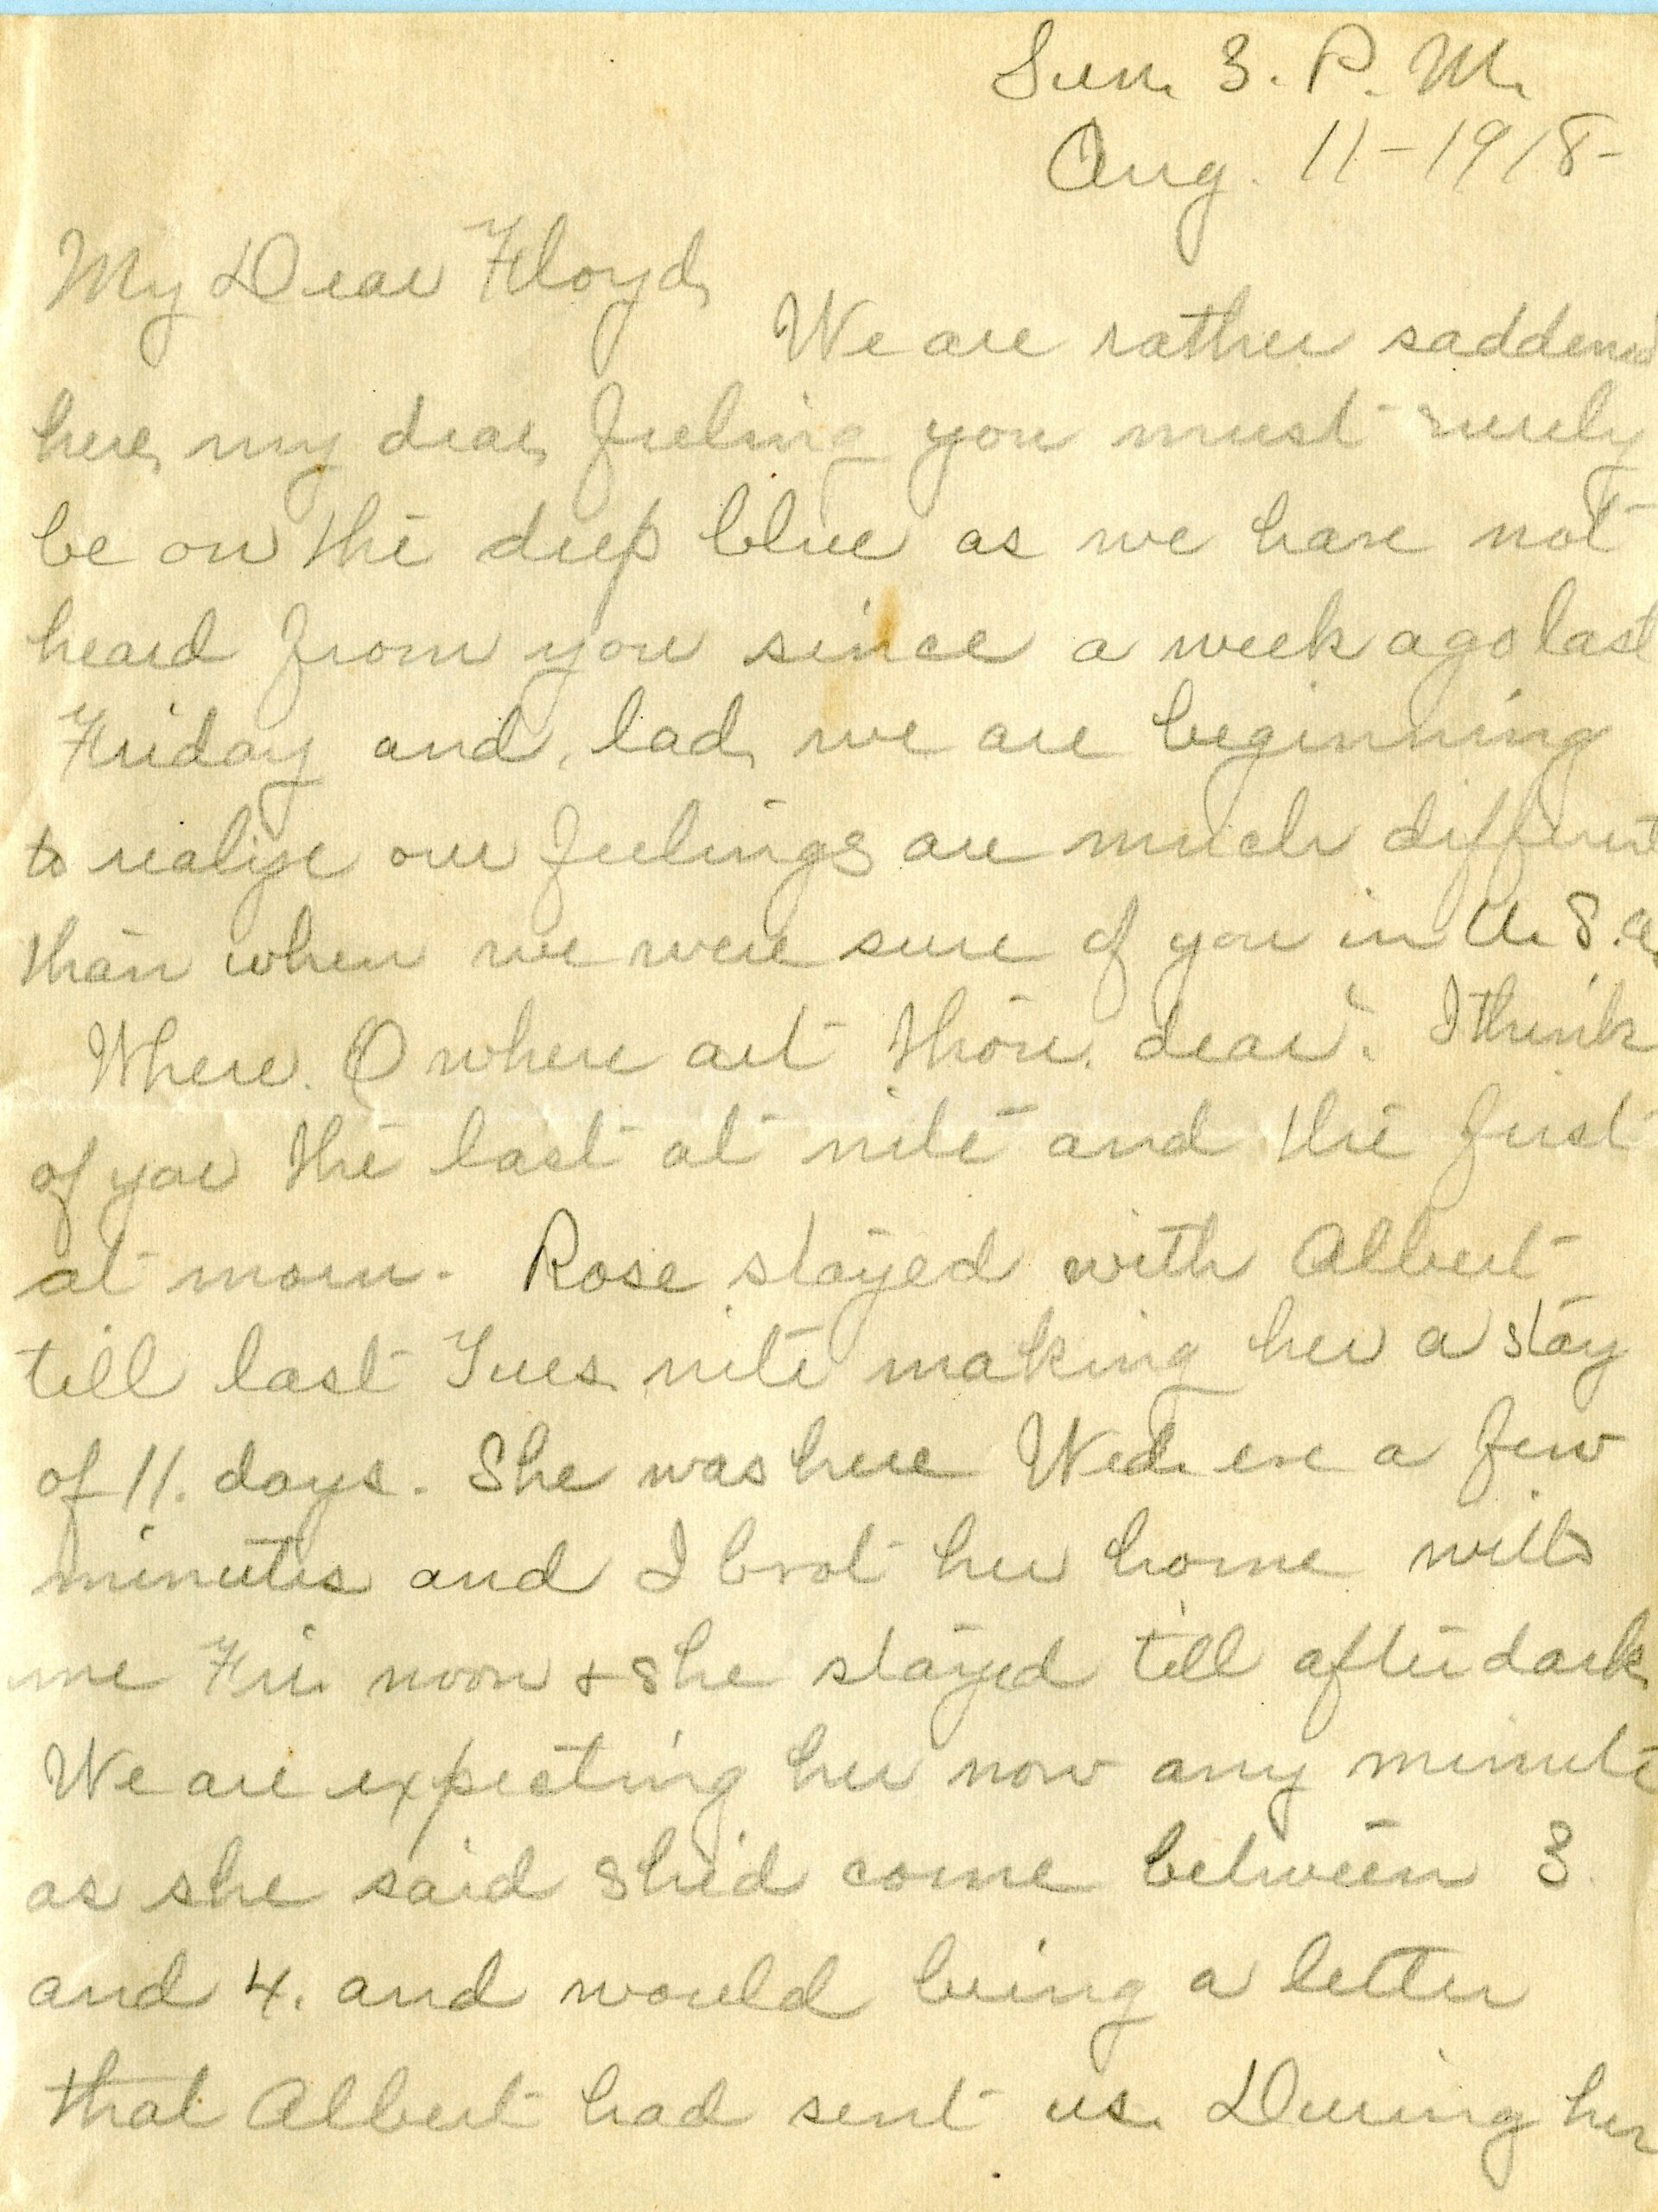 11-14 August 1918 Words from a Worried Mother